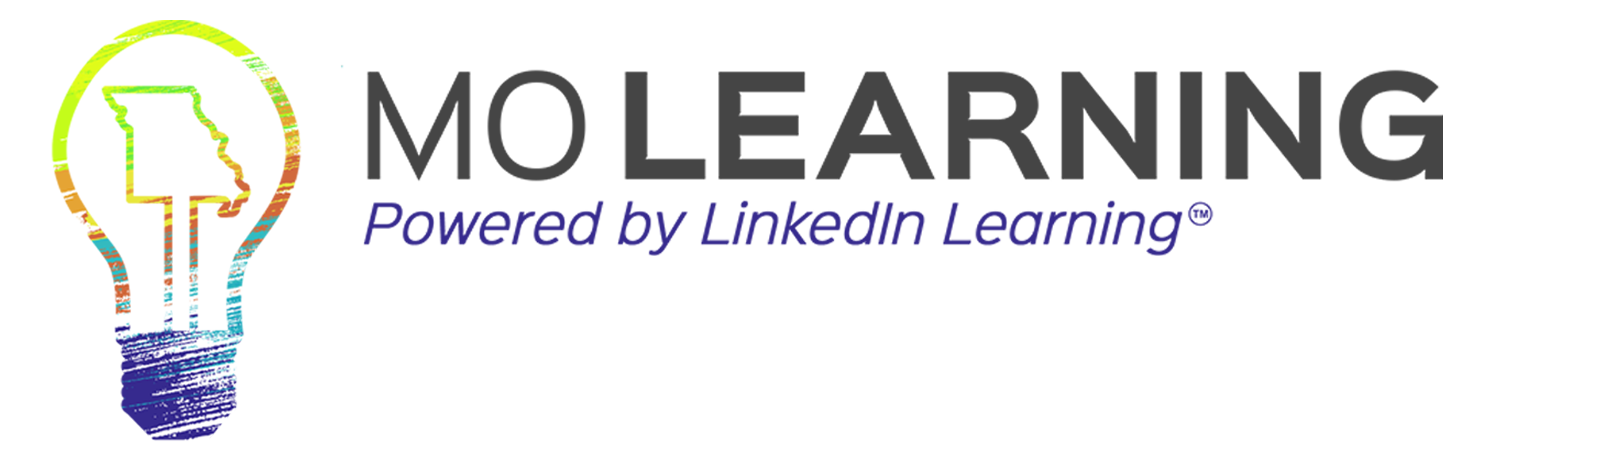 MO Learning - Powered by LinkedIn Learning™